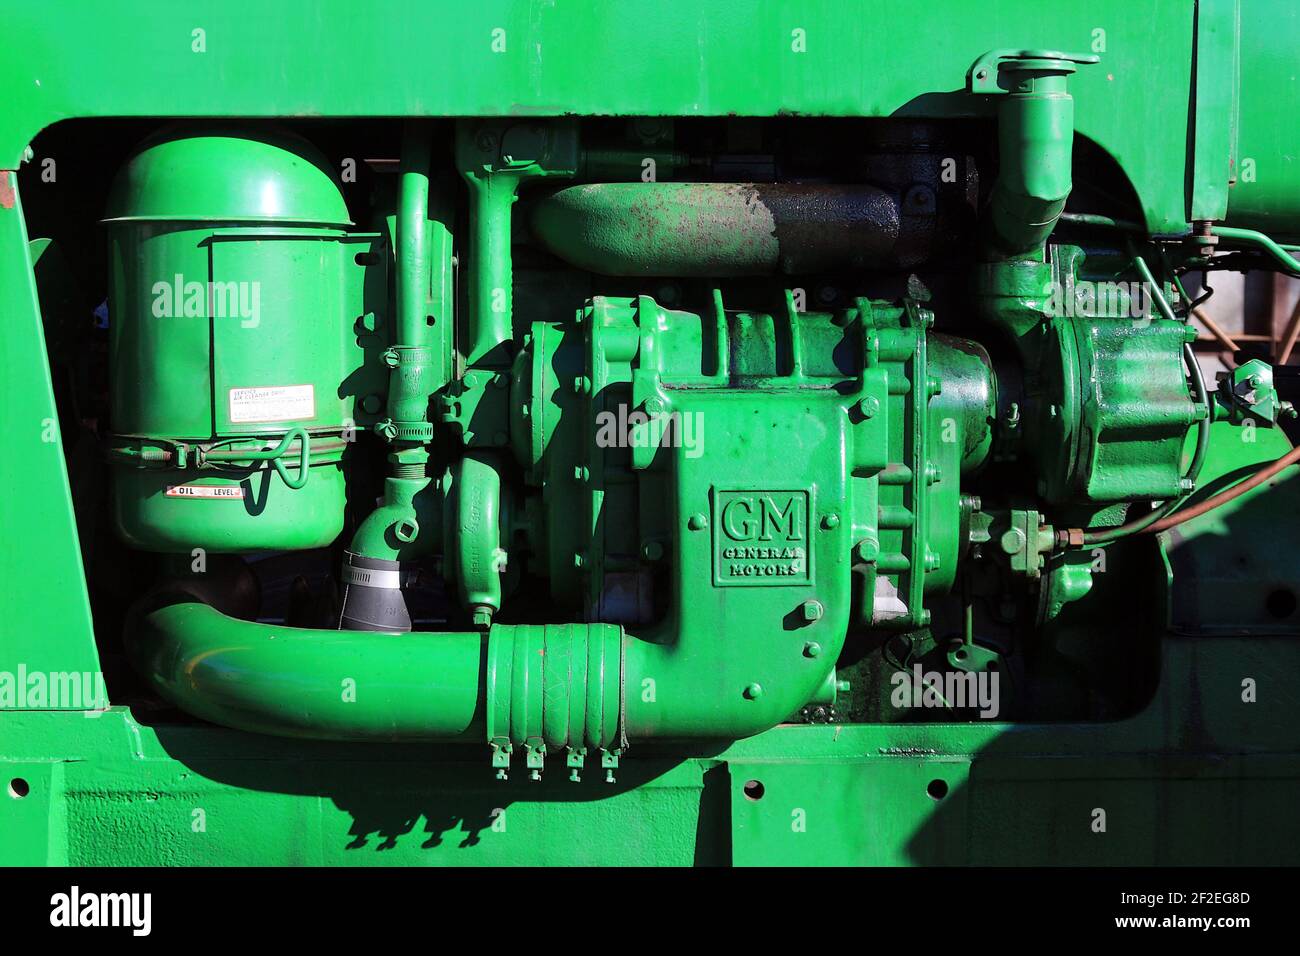 A bright green General Motors tractor engine. Stock Photo